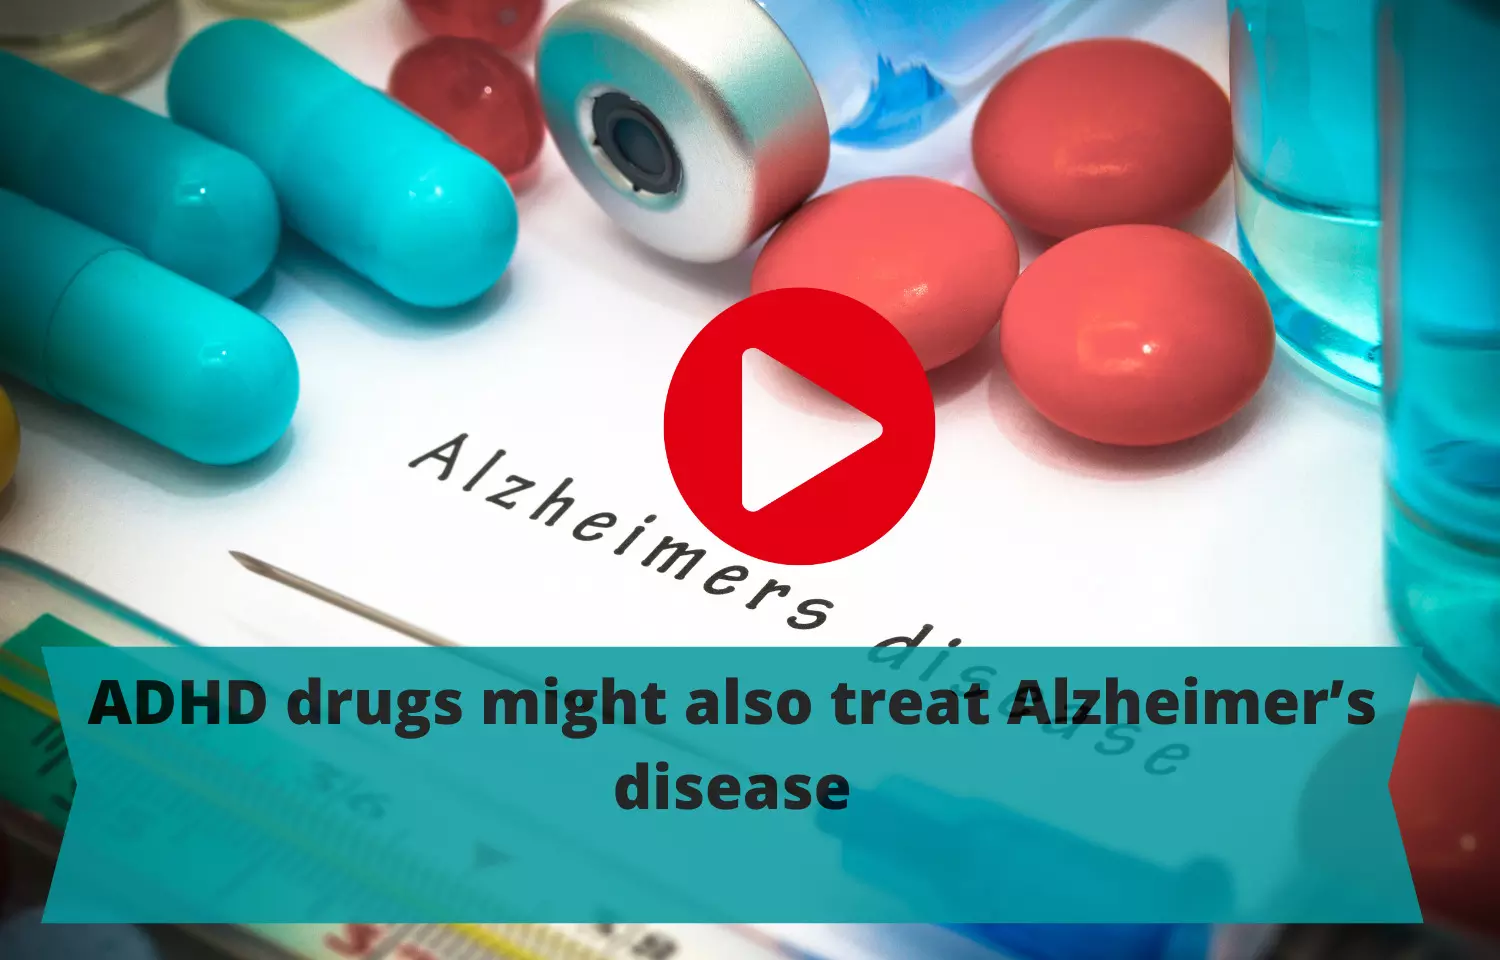 ADHD drugs might also treat Alzheimers disease